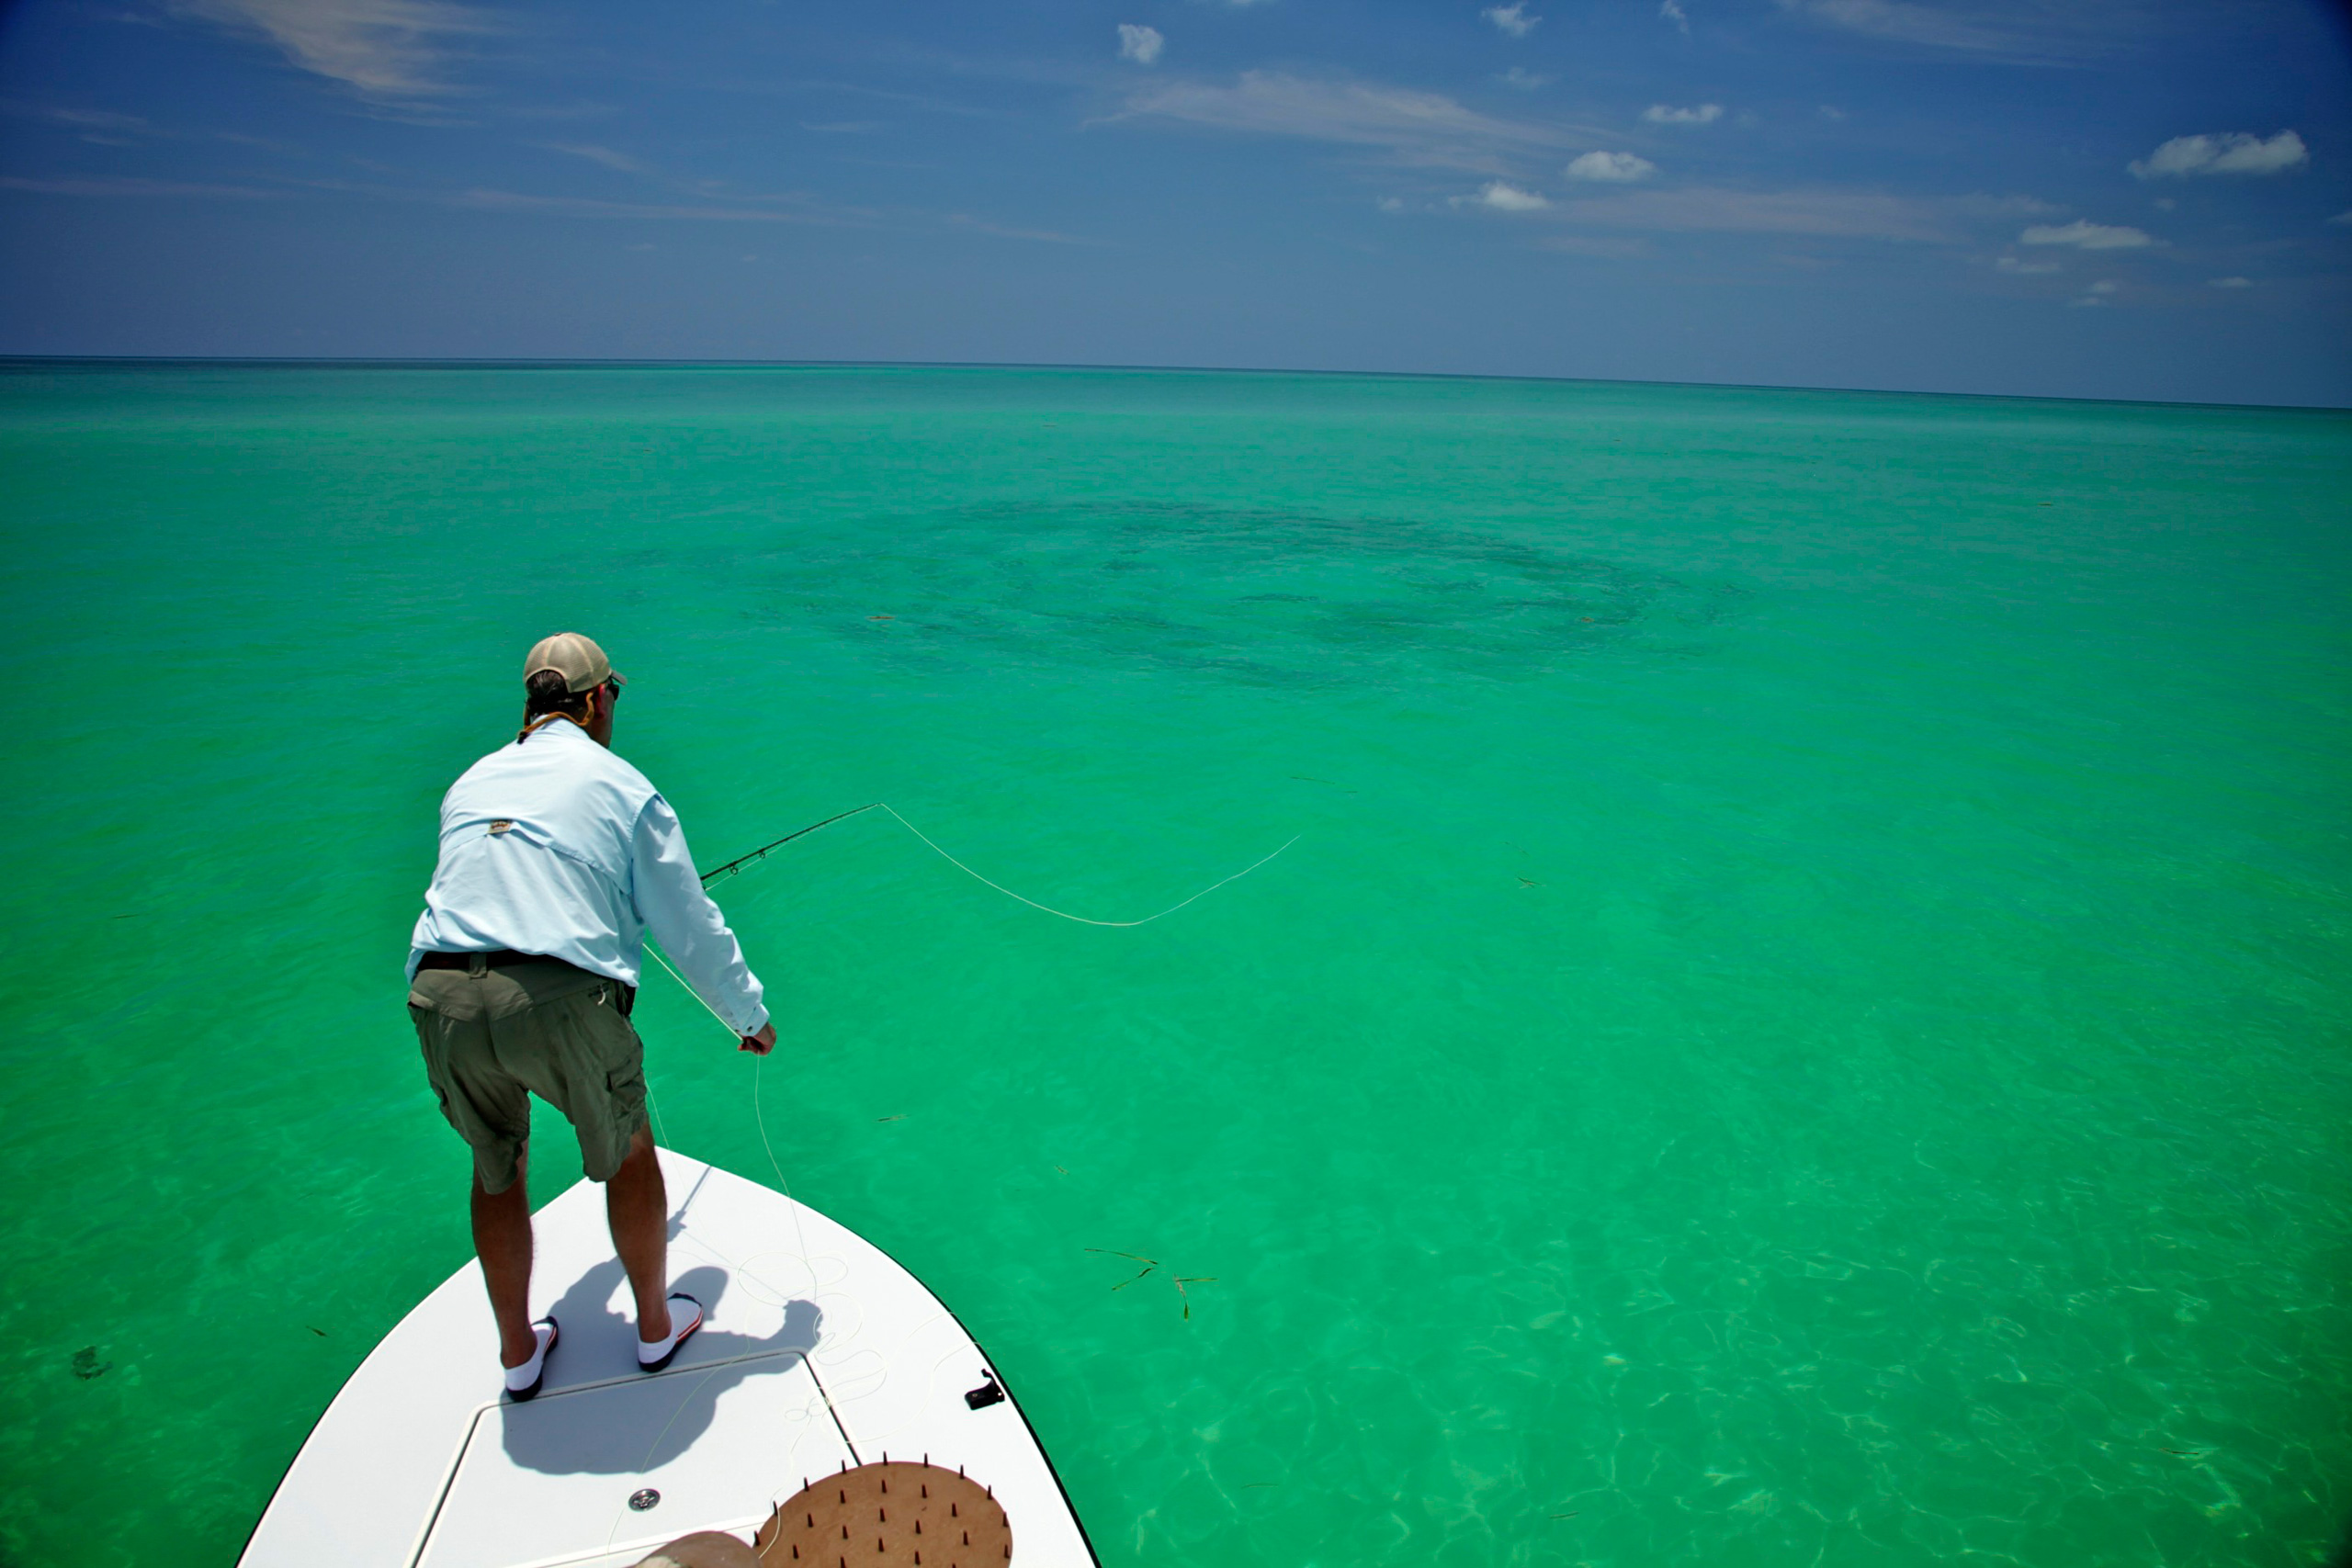 Jon Davis casts into a big daisy chain on the oceanside off Key West. Fly Fisherman's dream opportunity!